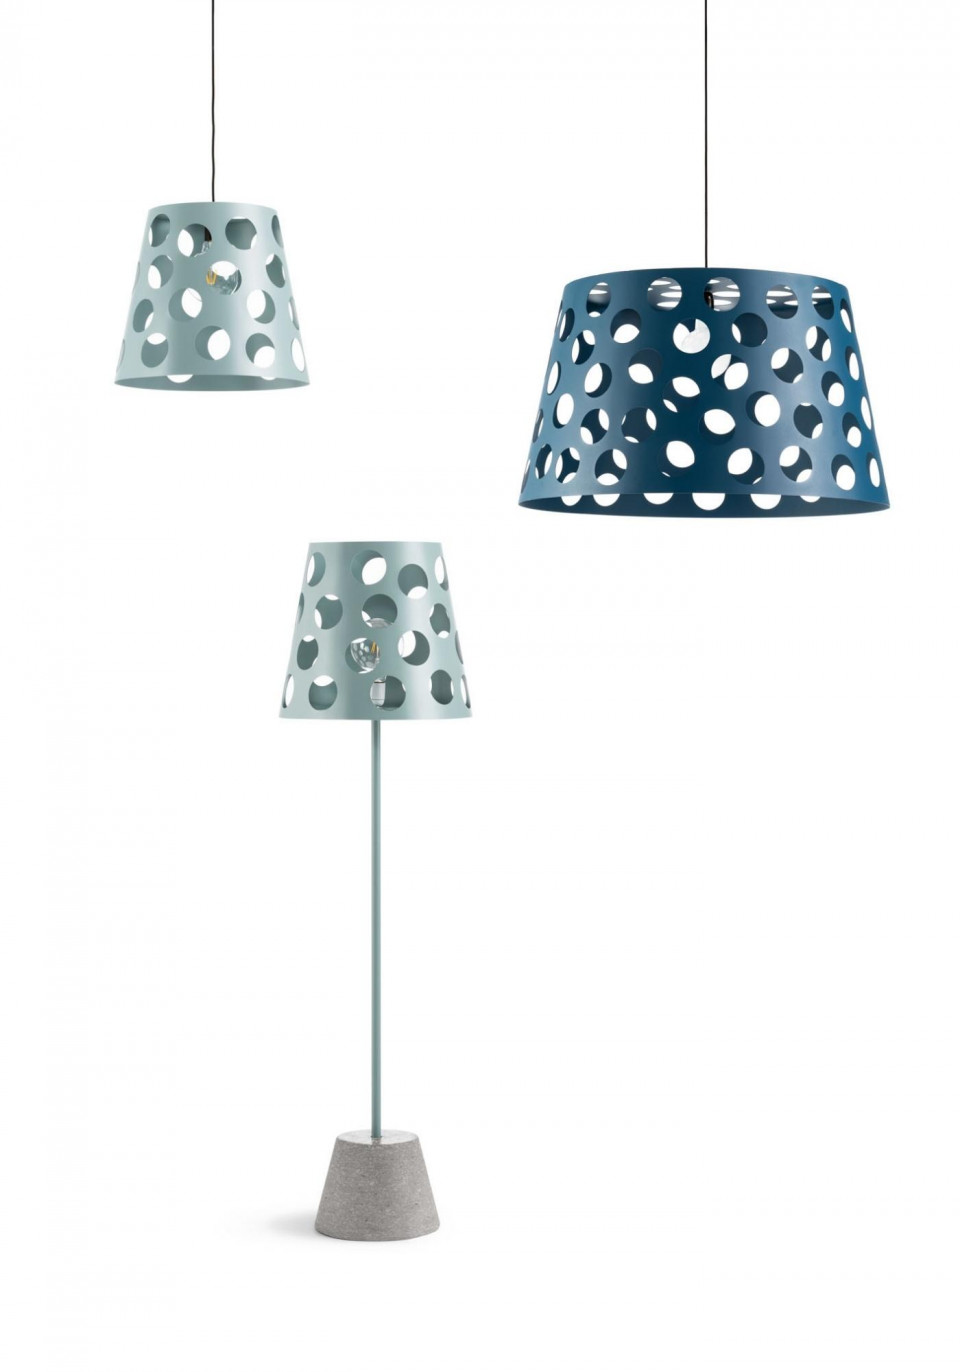 Bolle lamp collection design Paola Navone for MIDJ